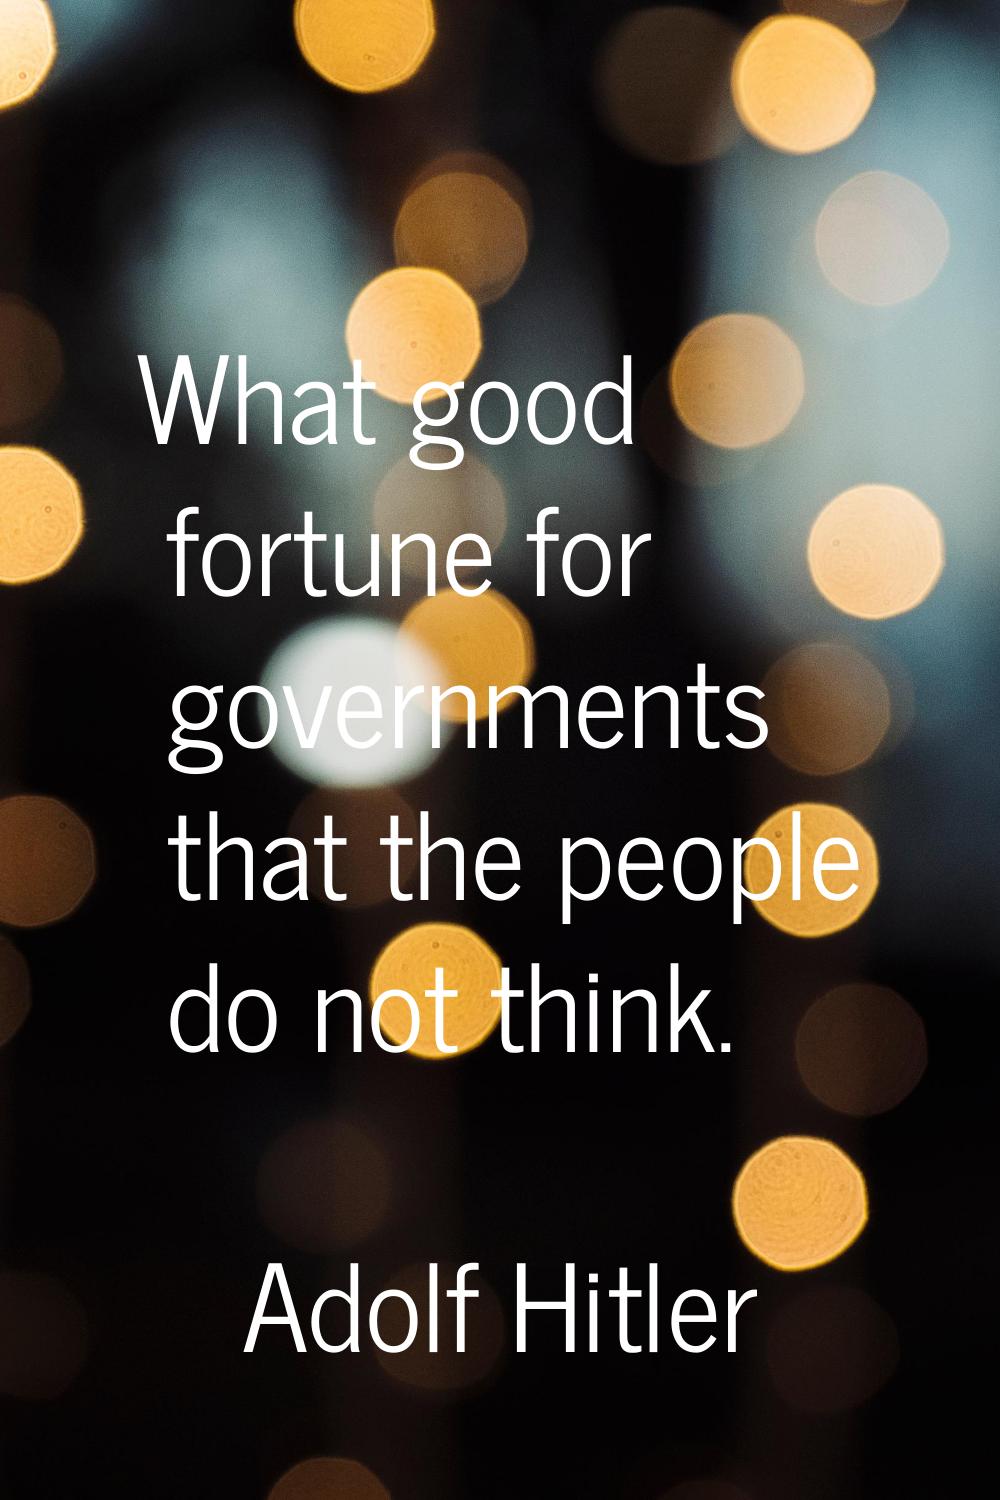 What good fortune for governments that the people do not think.